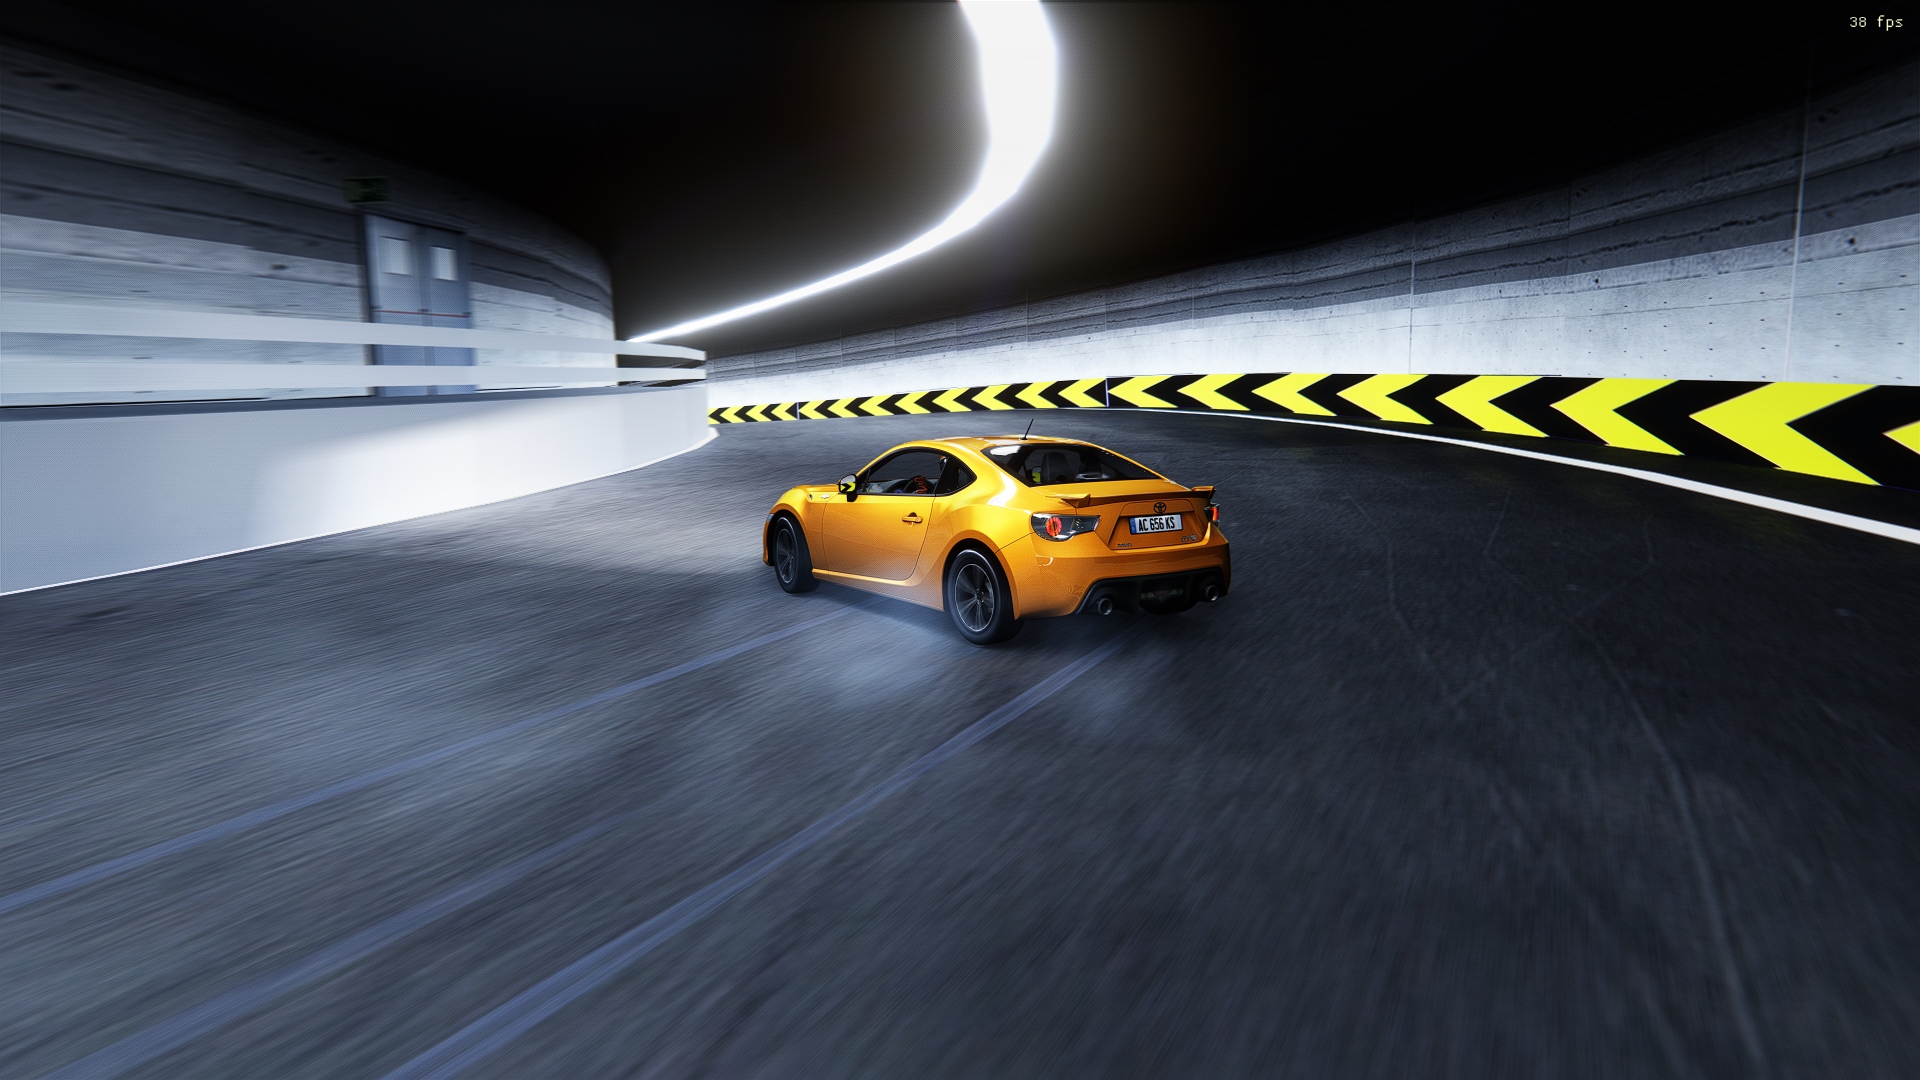 Screenshot_ks_toyota_gt86_special stage route 5_17-7-120-3-13-17.jpg